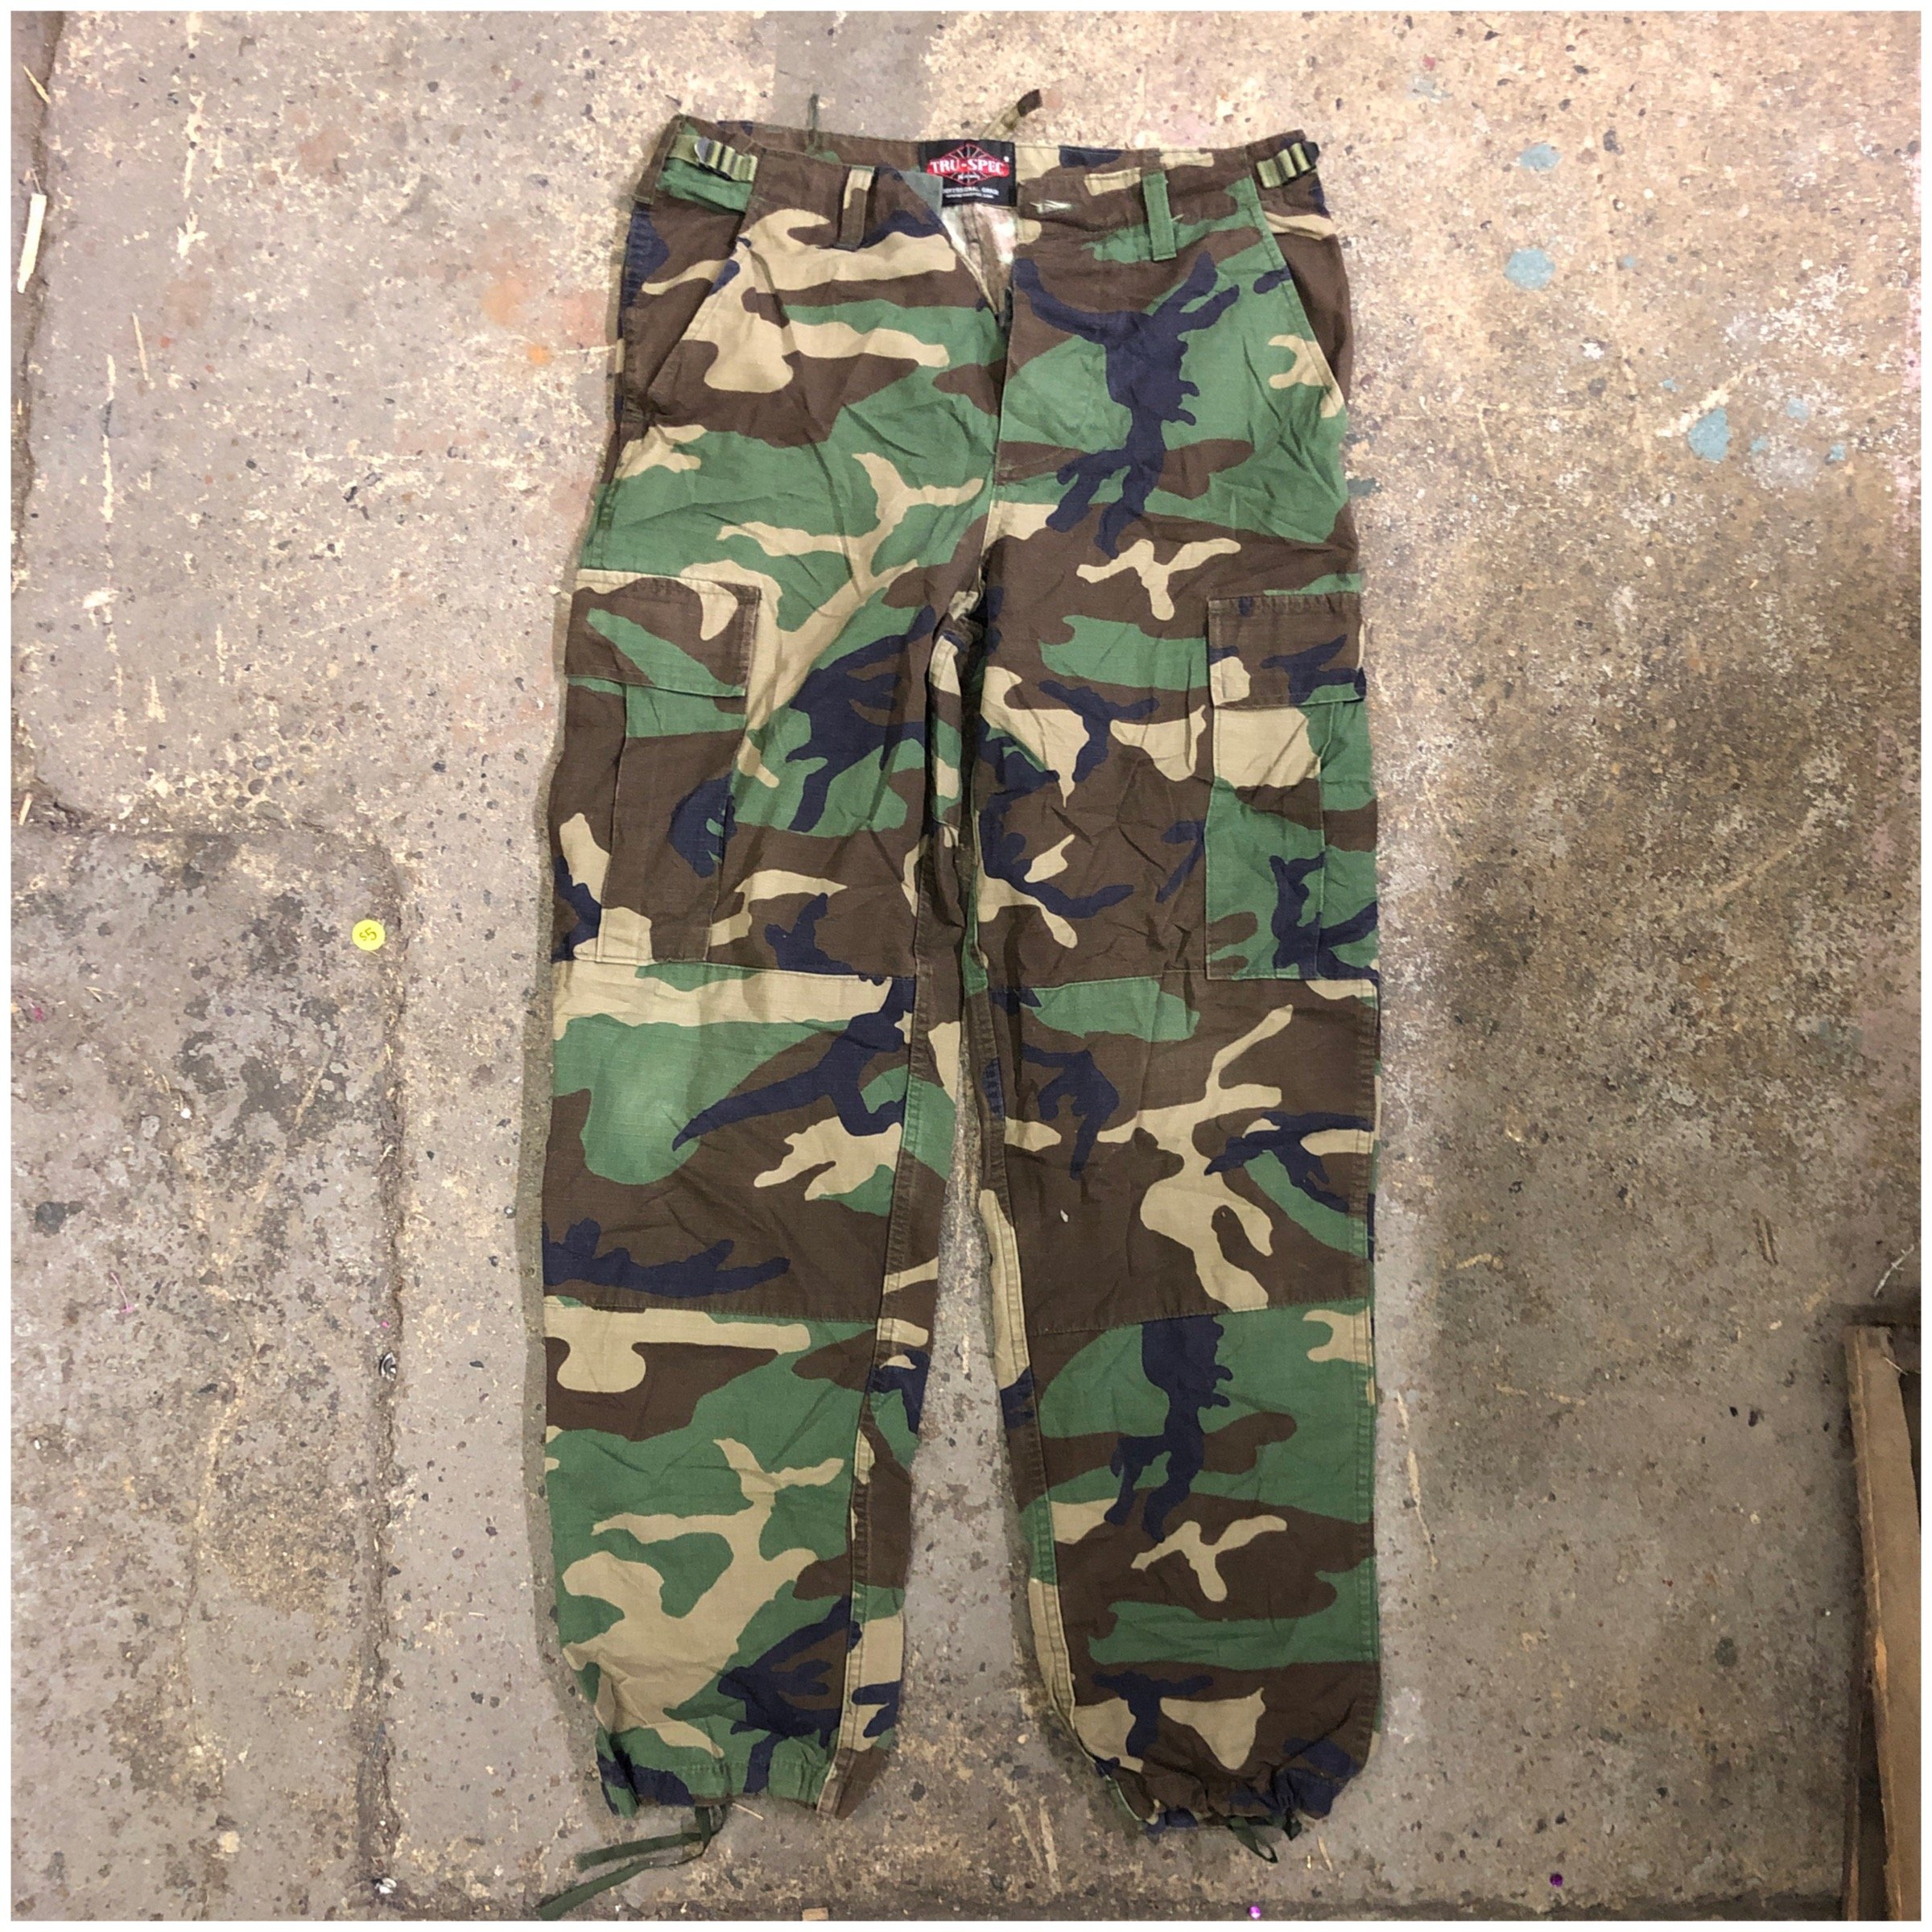 LOT OF 12 WHOLESALE WOODLAND CAMO MENS LIGHT WEIGHT BDU PANTS CHOOSE YOUR  SIZE | eBay